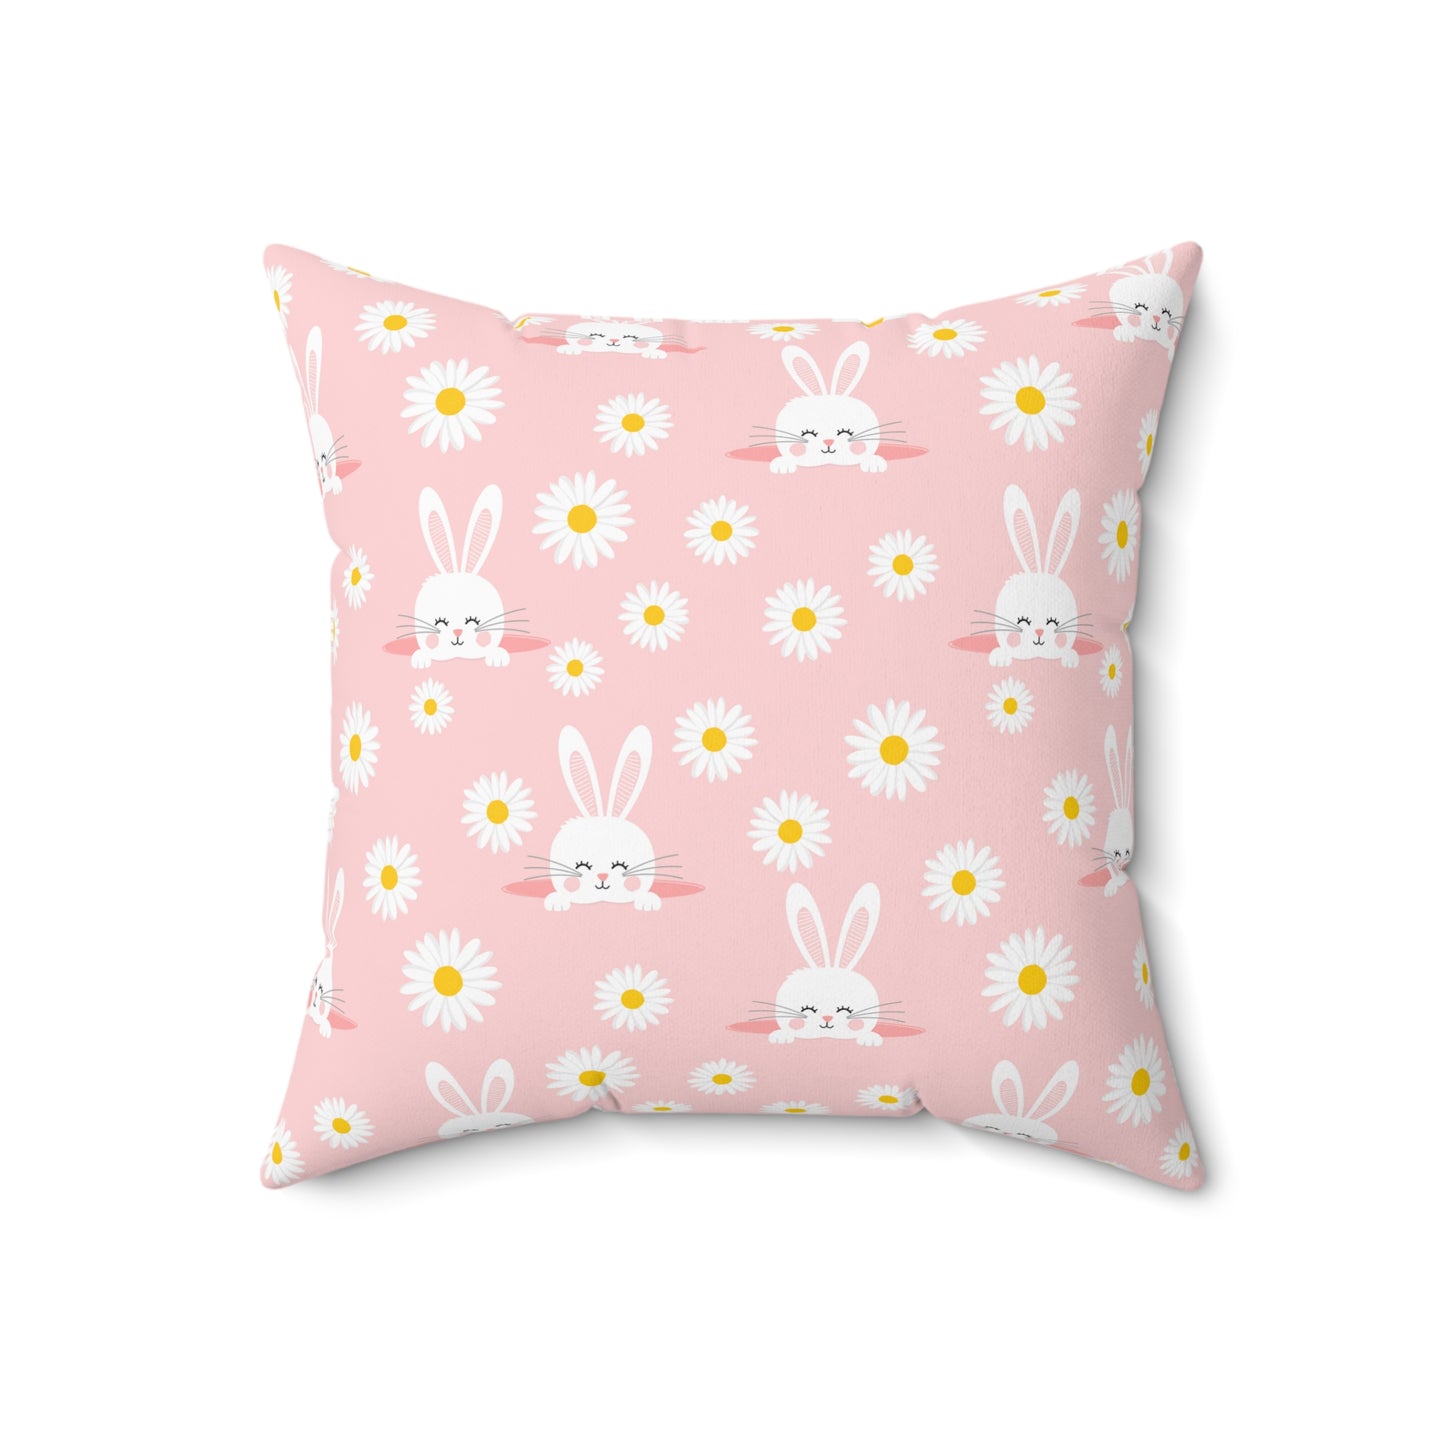 Smiling Bunnies and Daisies Spun Polyester Square Pillow